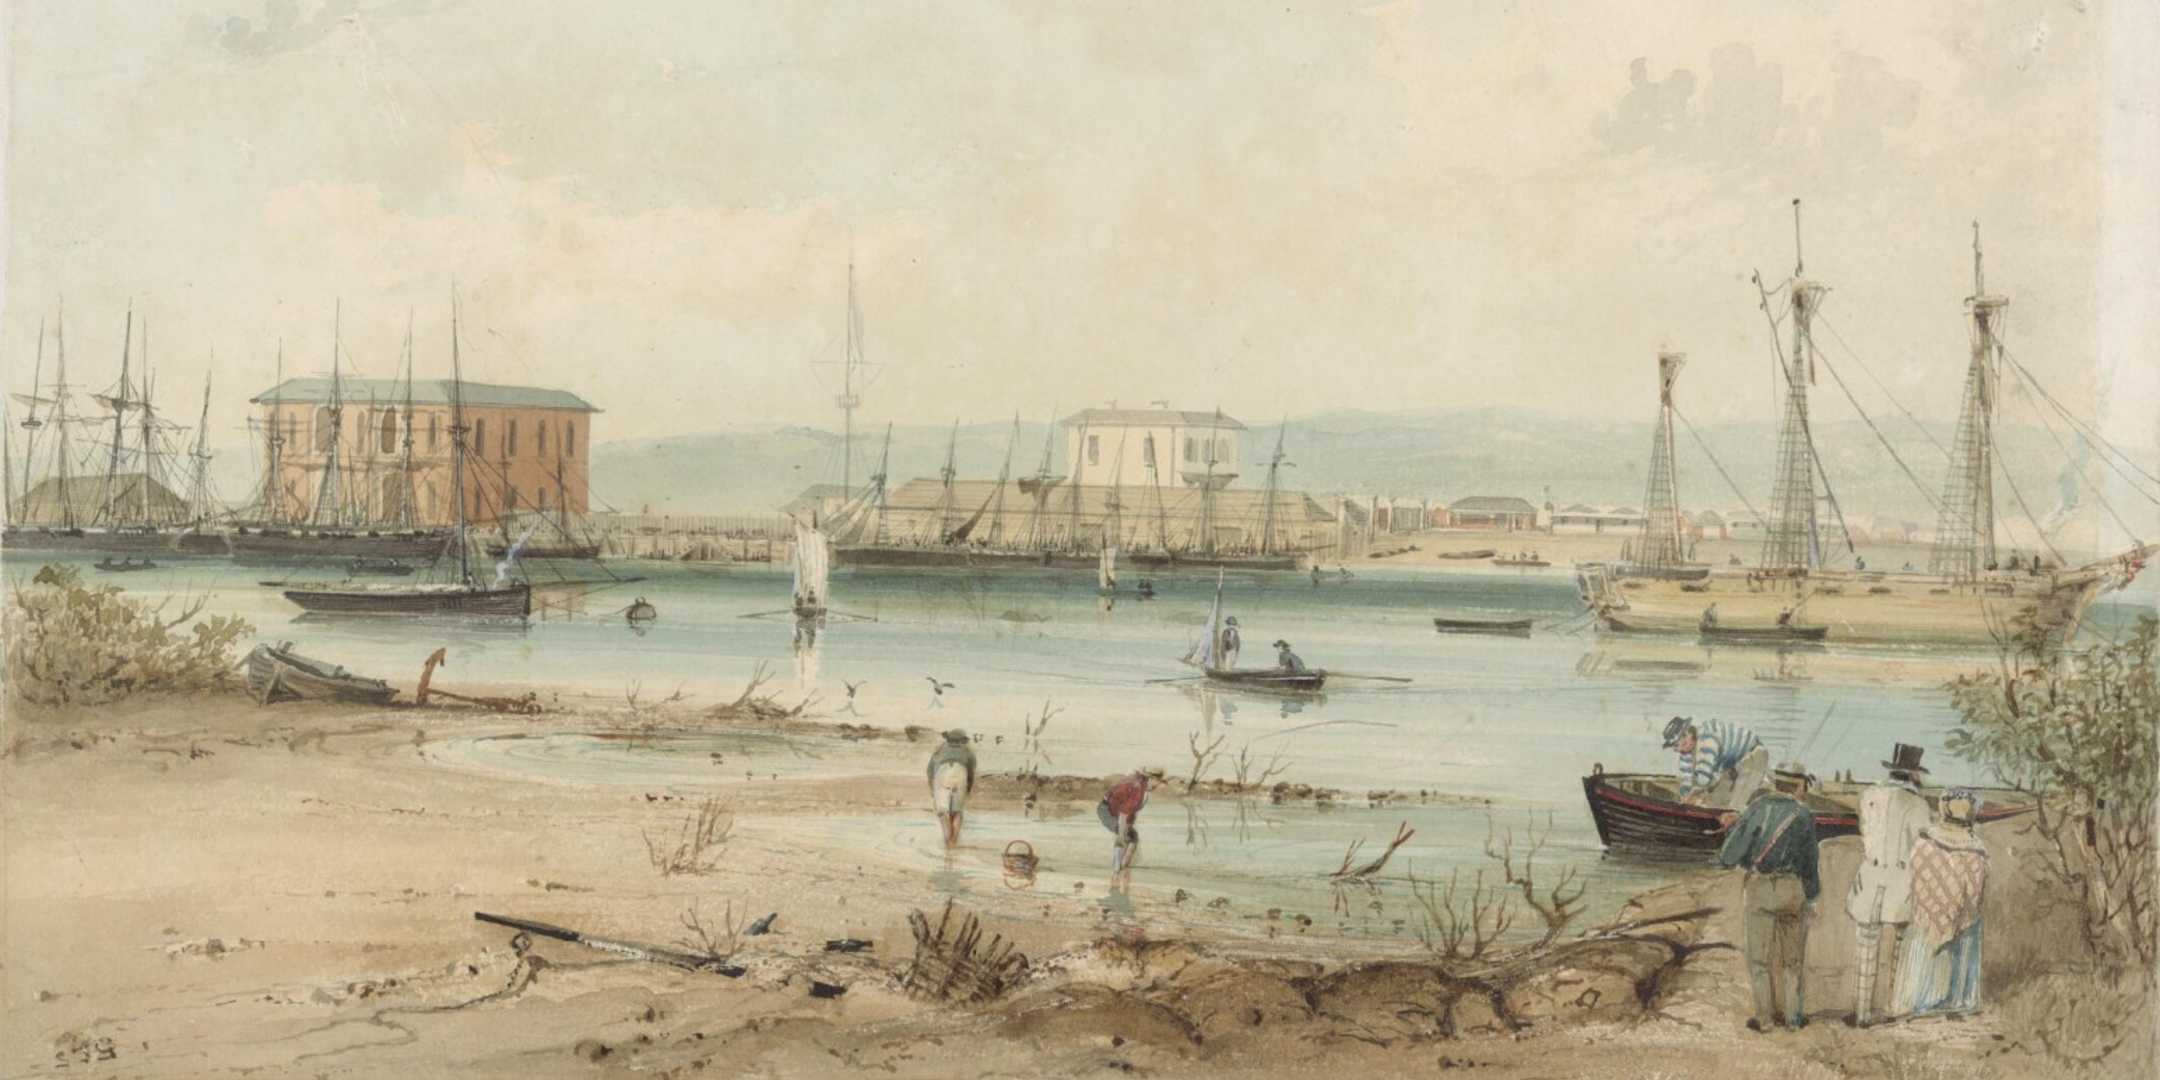 Watercolour of Port Adelaide, South Australia, by Samuel Thomas Gill, 1840s. Rex Nan Kivell Collection, National Library of Australia